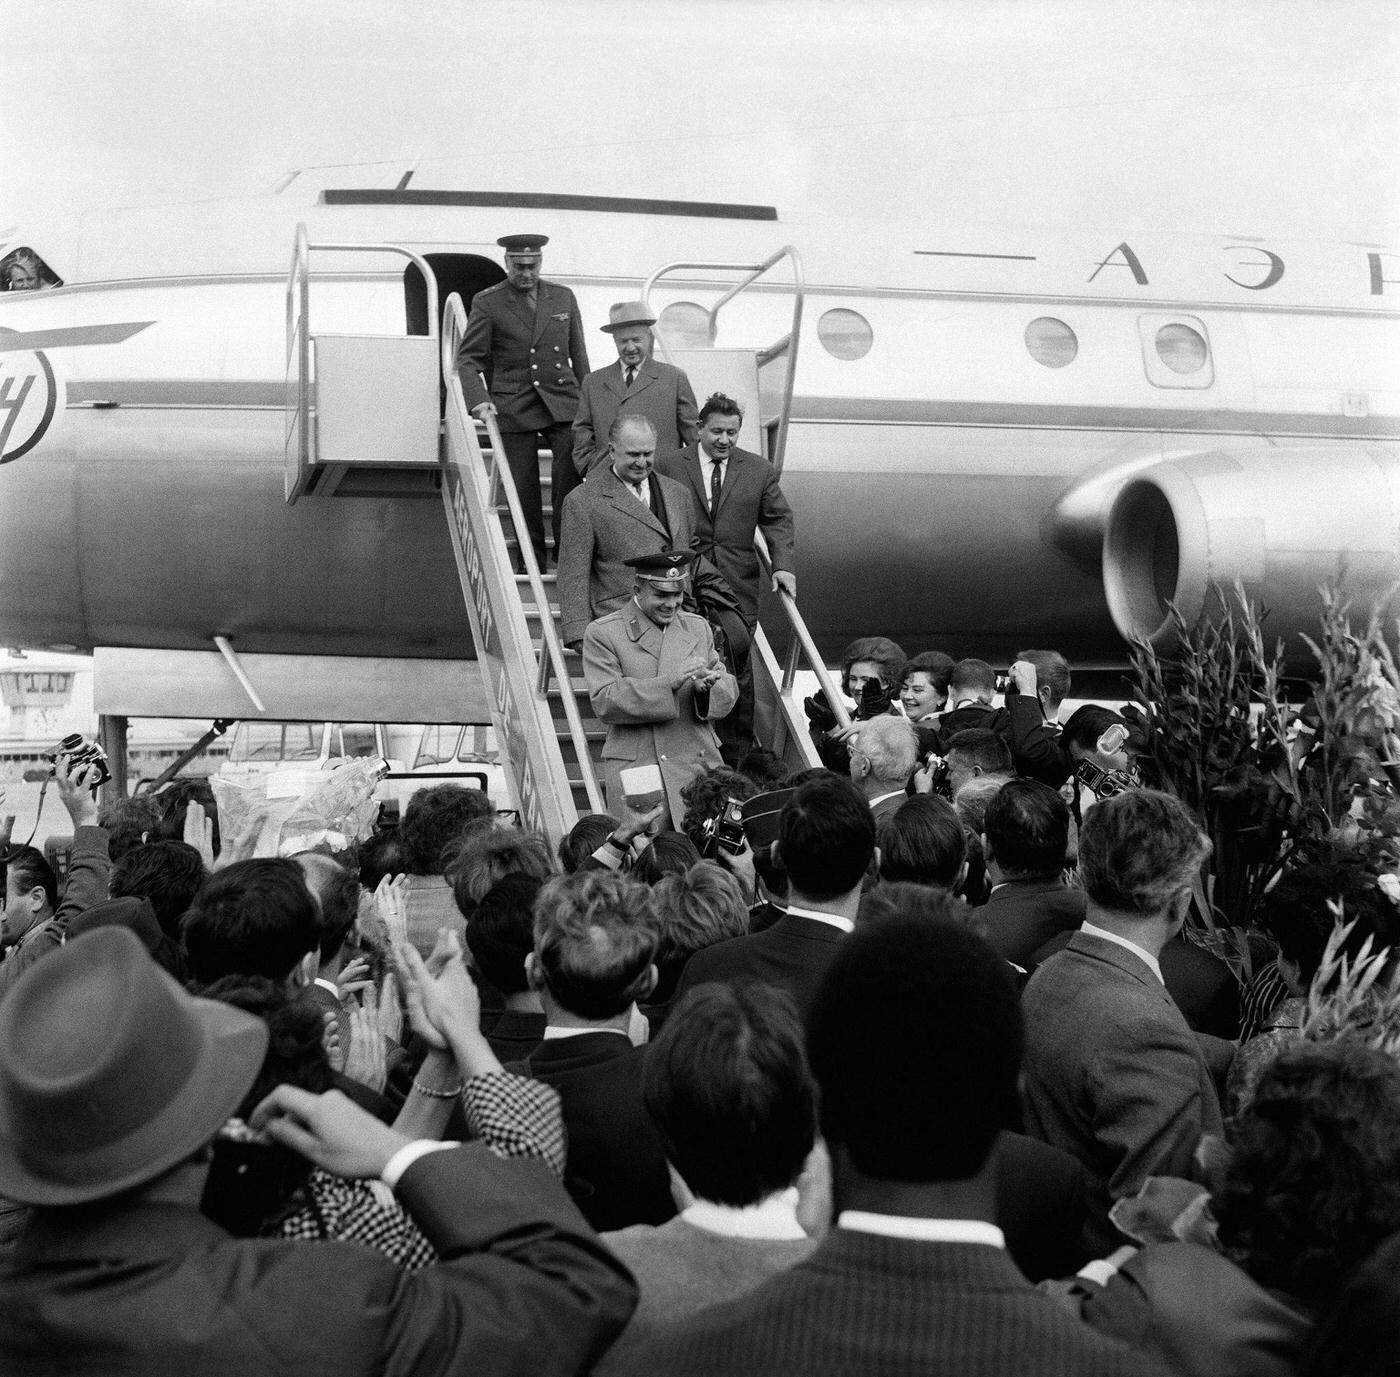 Russian cosmonaut Yuri Gagarin arriving at Le Bourget airport to attend the World Astronautics conference, 1963